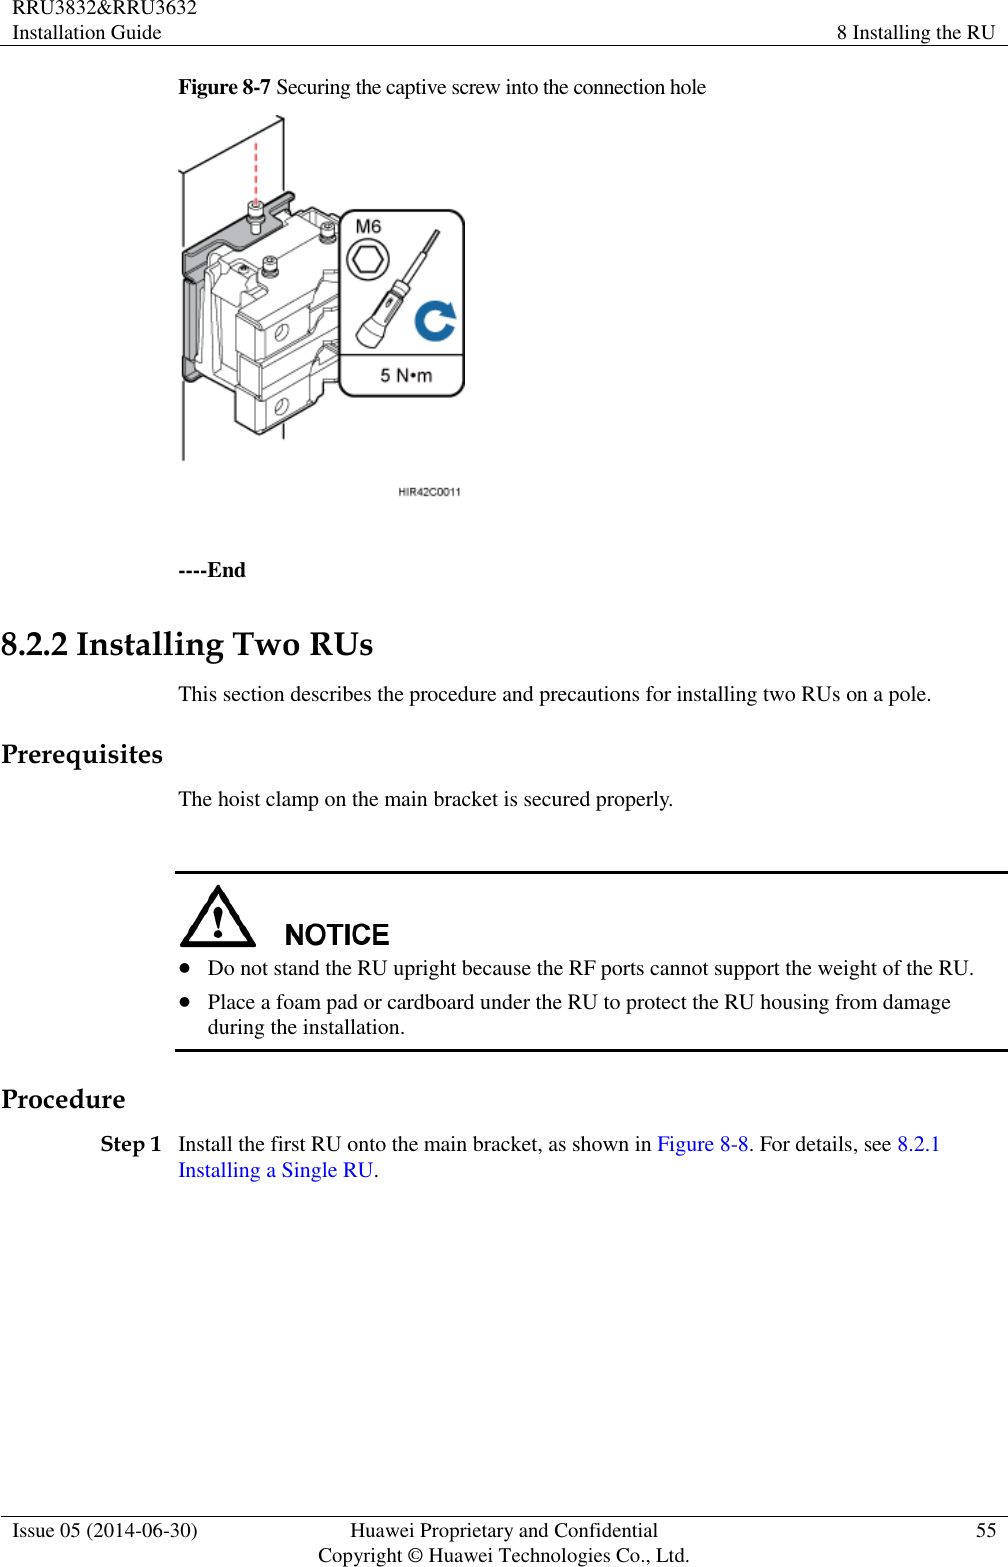 RRU3832&amp;RRU3632 Installation Guide 8 Installing the RU  Issue 05 (2014-06-30) Huawei Proprietary and Confidential                                     Copyright © Huawei Technologies Co., Ltd. 55  Figure 8-7 Securing the captive screw into the connection hole   ----End 8.2.2 Installing Two RUs This section describes the procedure and precautions for installing two RUs on a pole. Prerequisites The hoist clamp on the main bracket is secured properly.    Do not stand the RU upright because the RF ports cannot support the weight of the RU.  Place a foam pad or cardboard under the RU to protect the RU housing from damage during the installation. Procedure Step 1 Install the first RU onto the main bracket, as shown in Figure 8-8. For details, see 8.2.1 Installing a Single RU. 